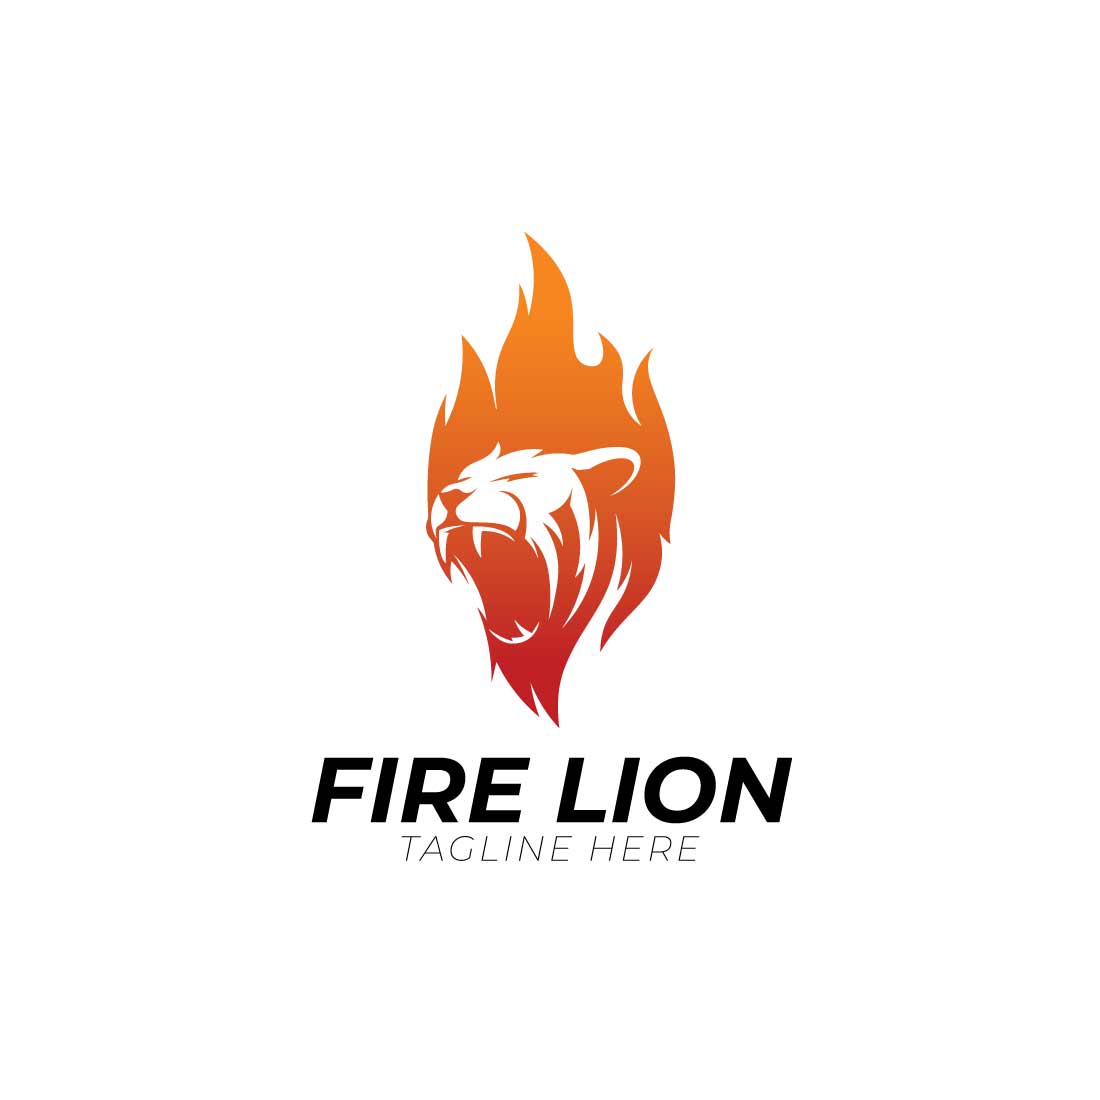 Initial Fire Lion logo preview image.